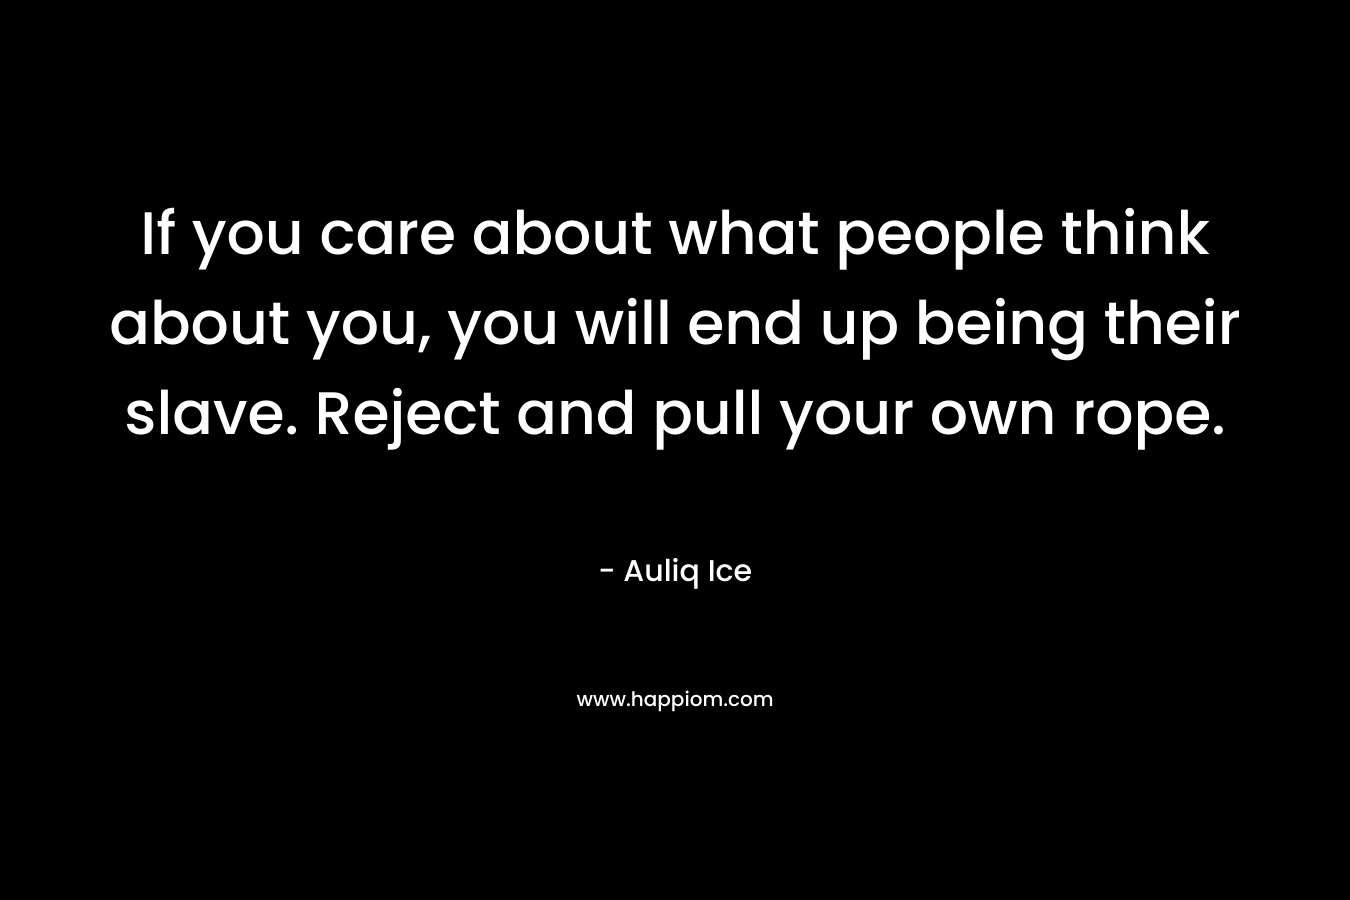 If you care about what people think about you, you will end up being their slave. Reject and pull your own rope.